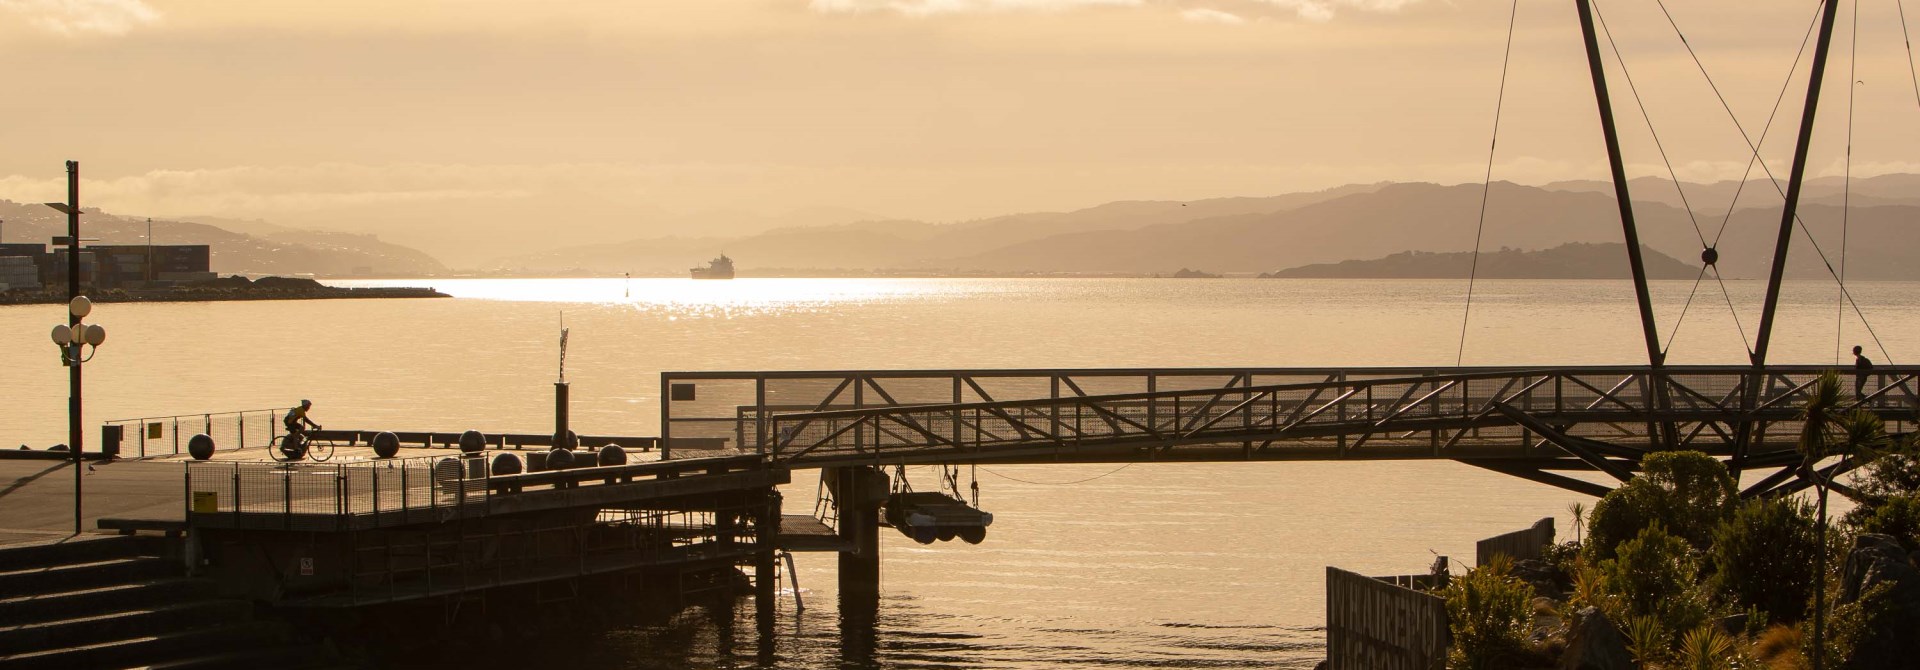 Wellington Harbour, doused in orange light as the sun comes up, looking out from the lagoon over the waterfront bridge towards Matiu/Somes Island.